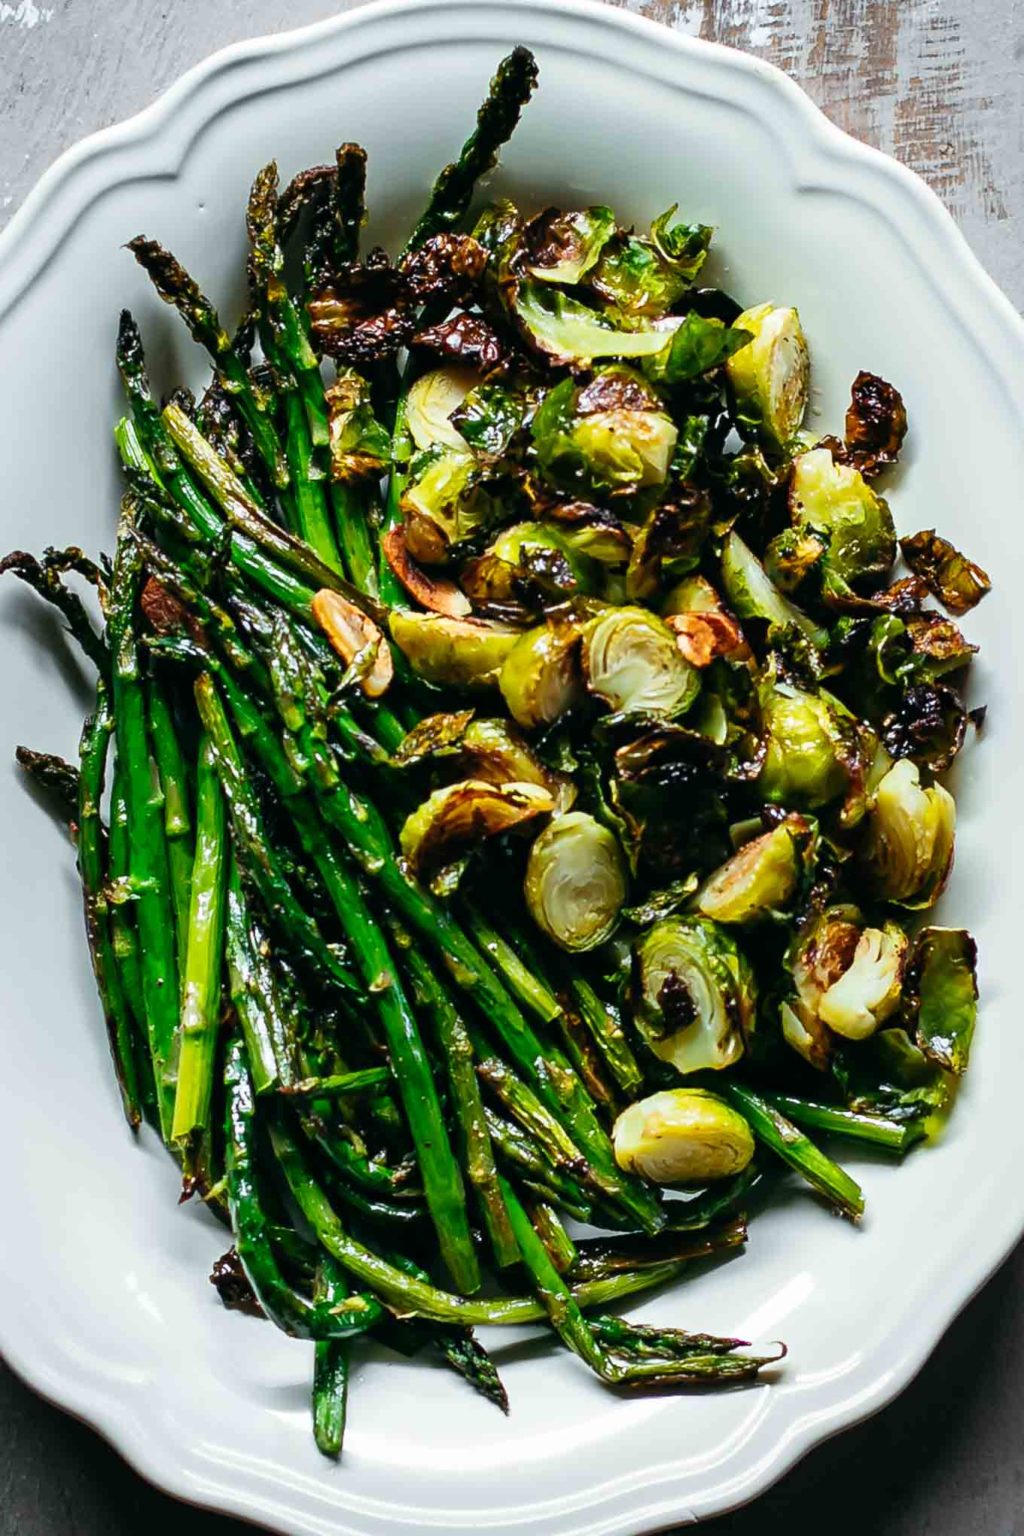 Roasted Brussels Sprouts and Asparagus | 5 Ingredients, 40 Minutes!